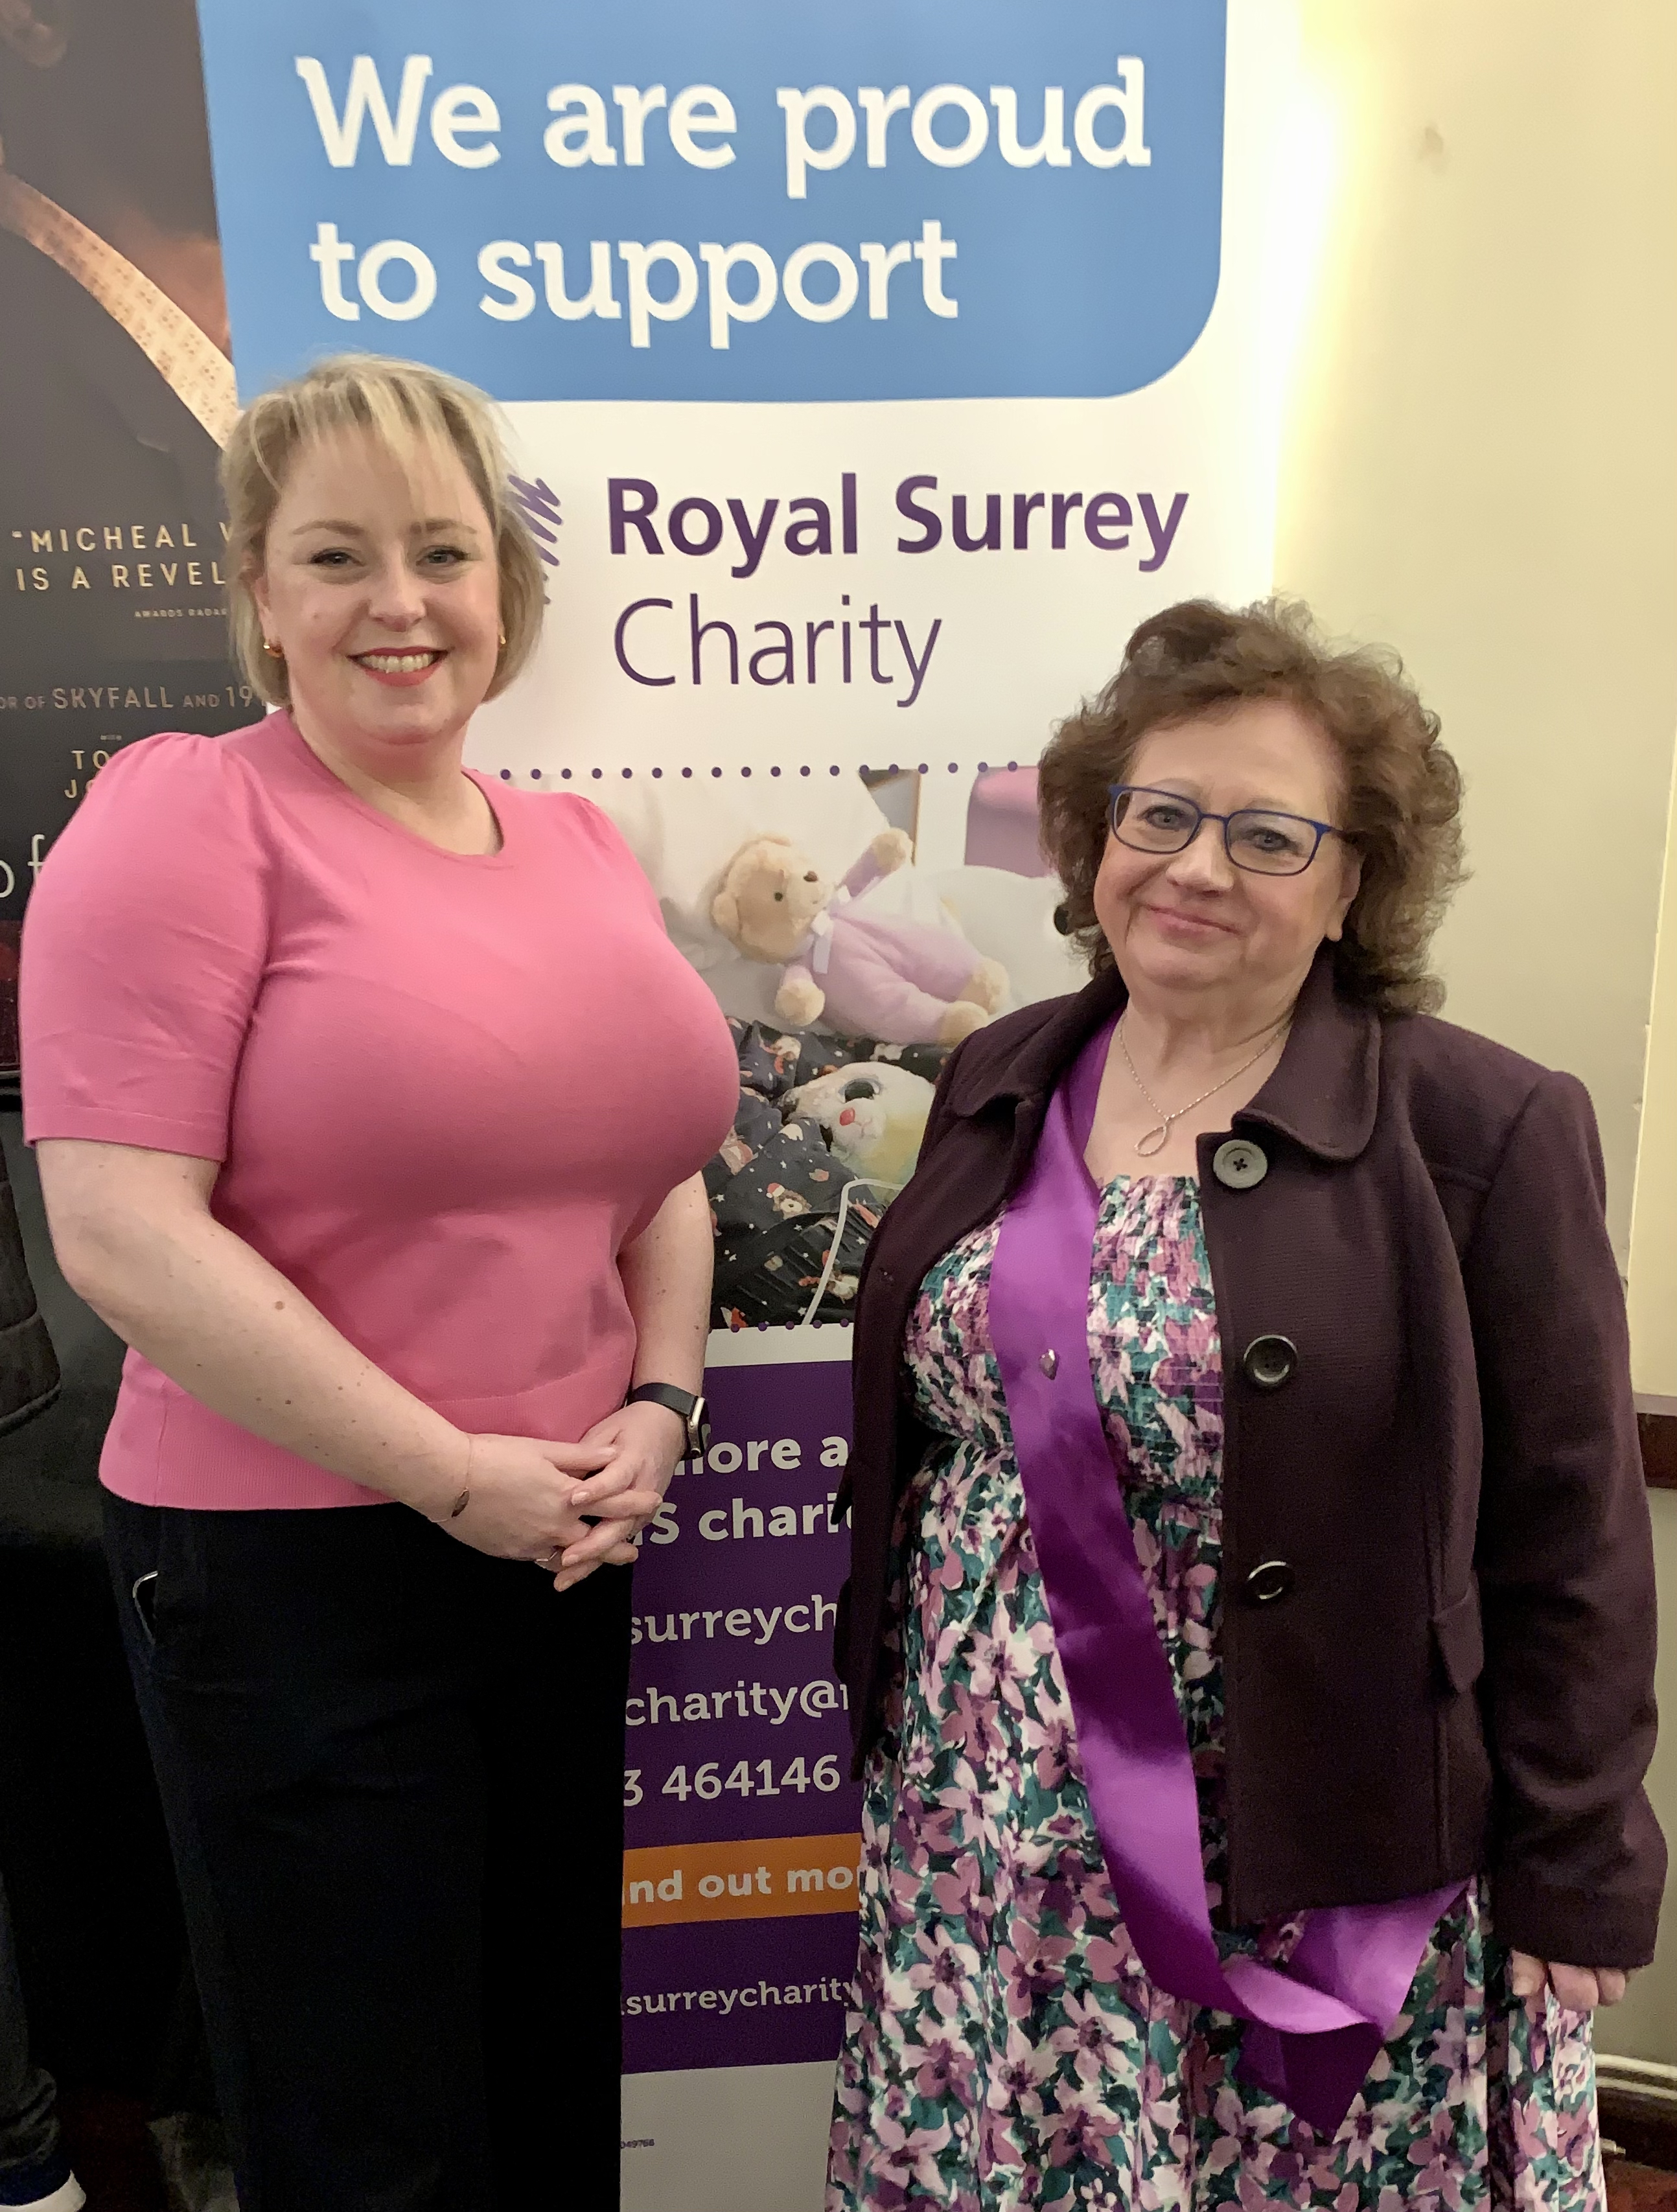 Lisa Townsend with Judith Storey from the Royal Surrey Charity